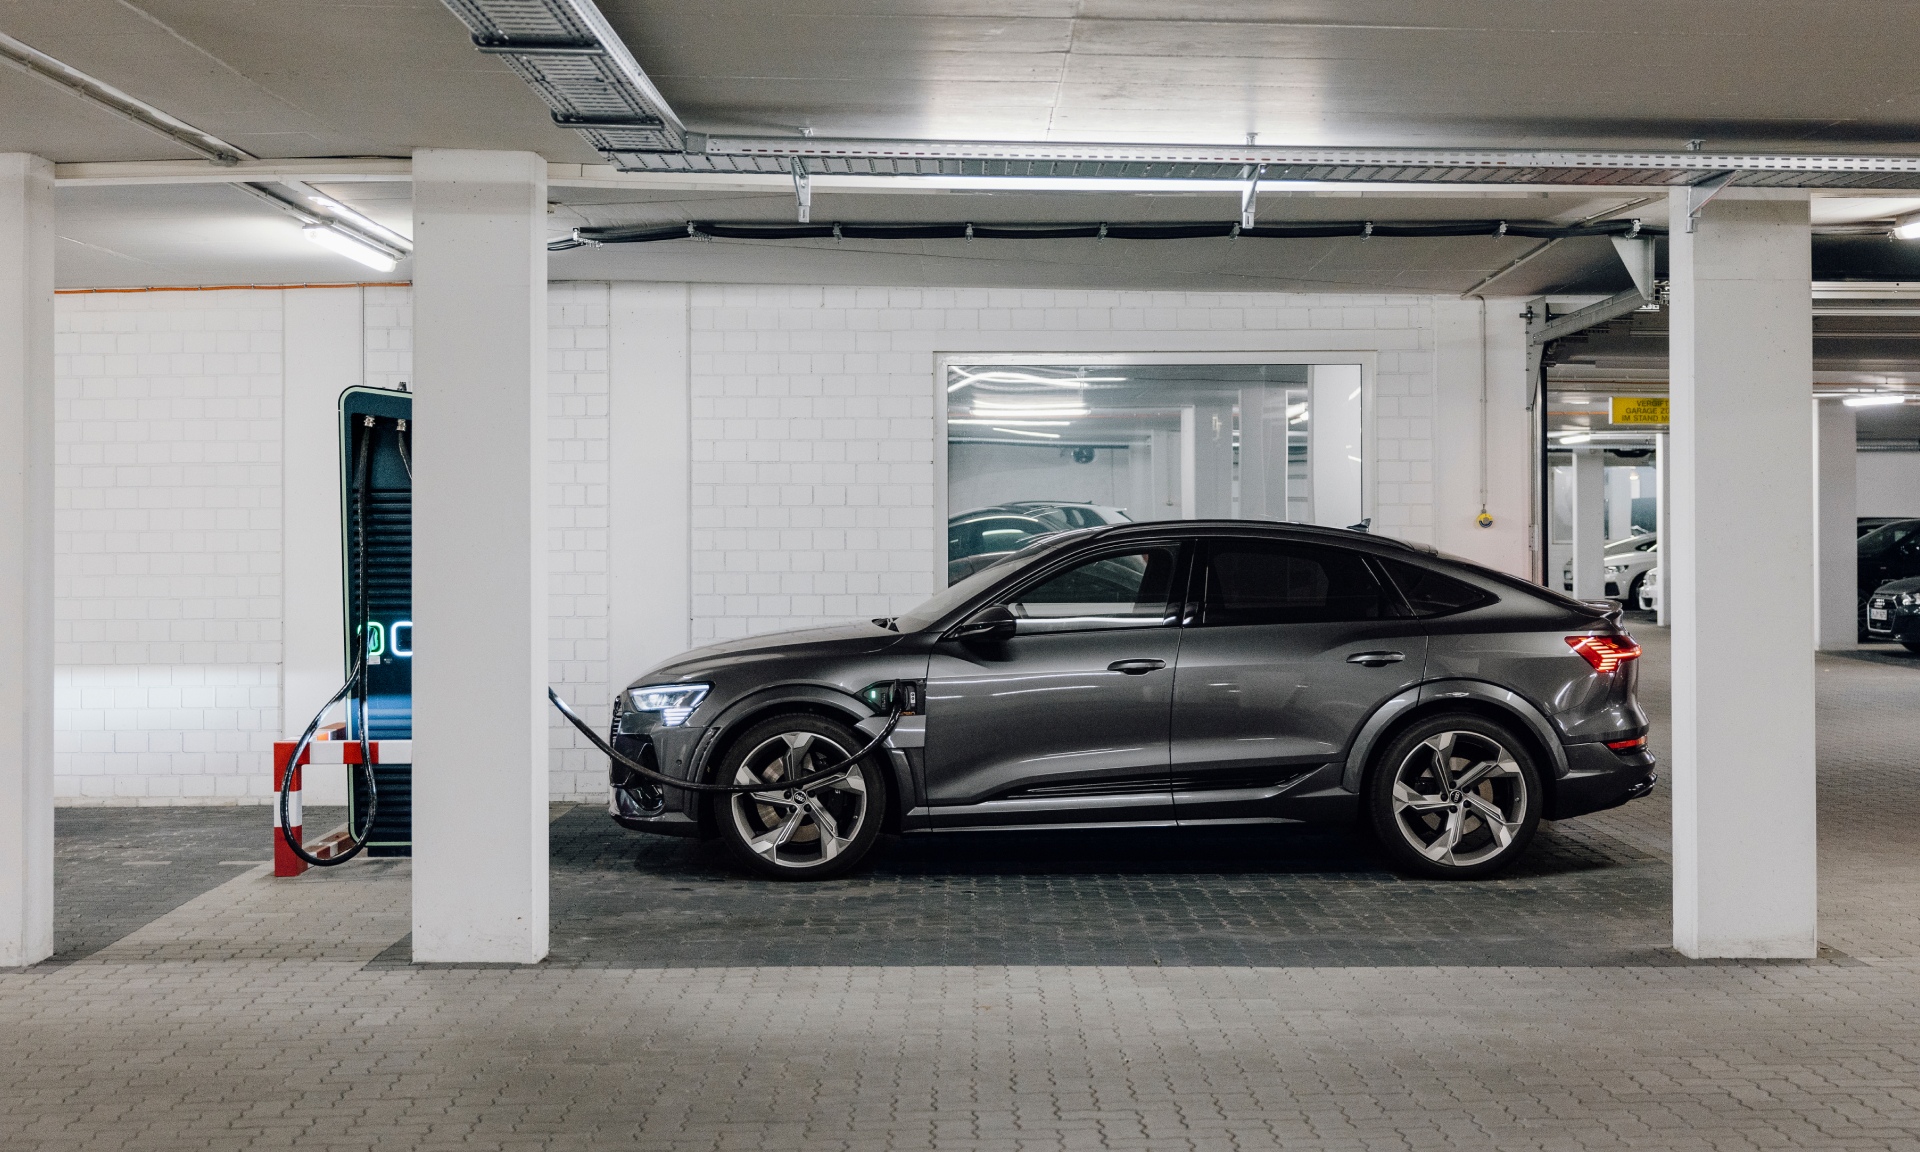 The Audi e-tron S Sportback charges in the underground car park.